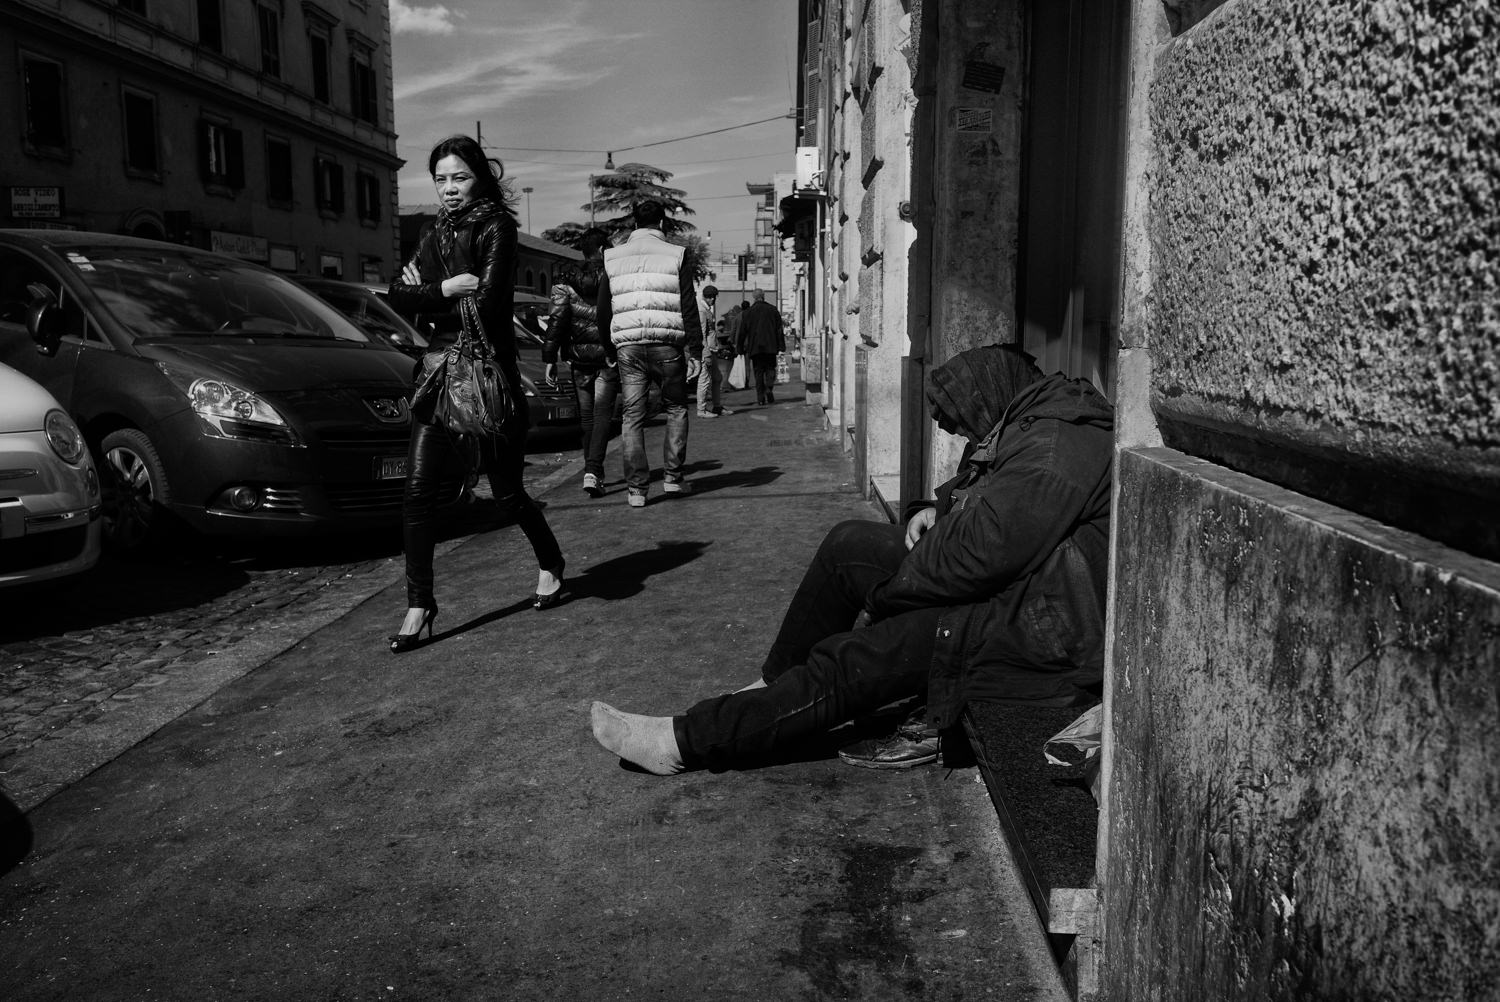 Street Photography in Rome by Leica Ambassador Eolo Perfido.